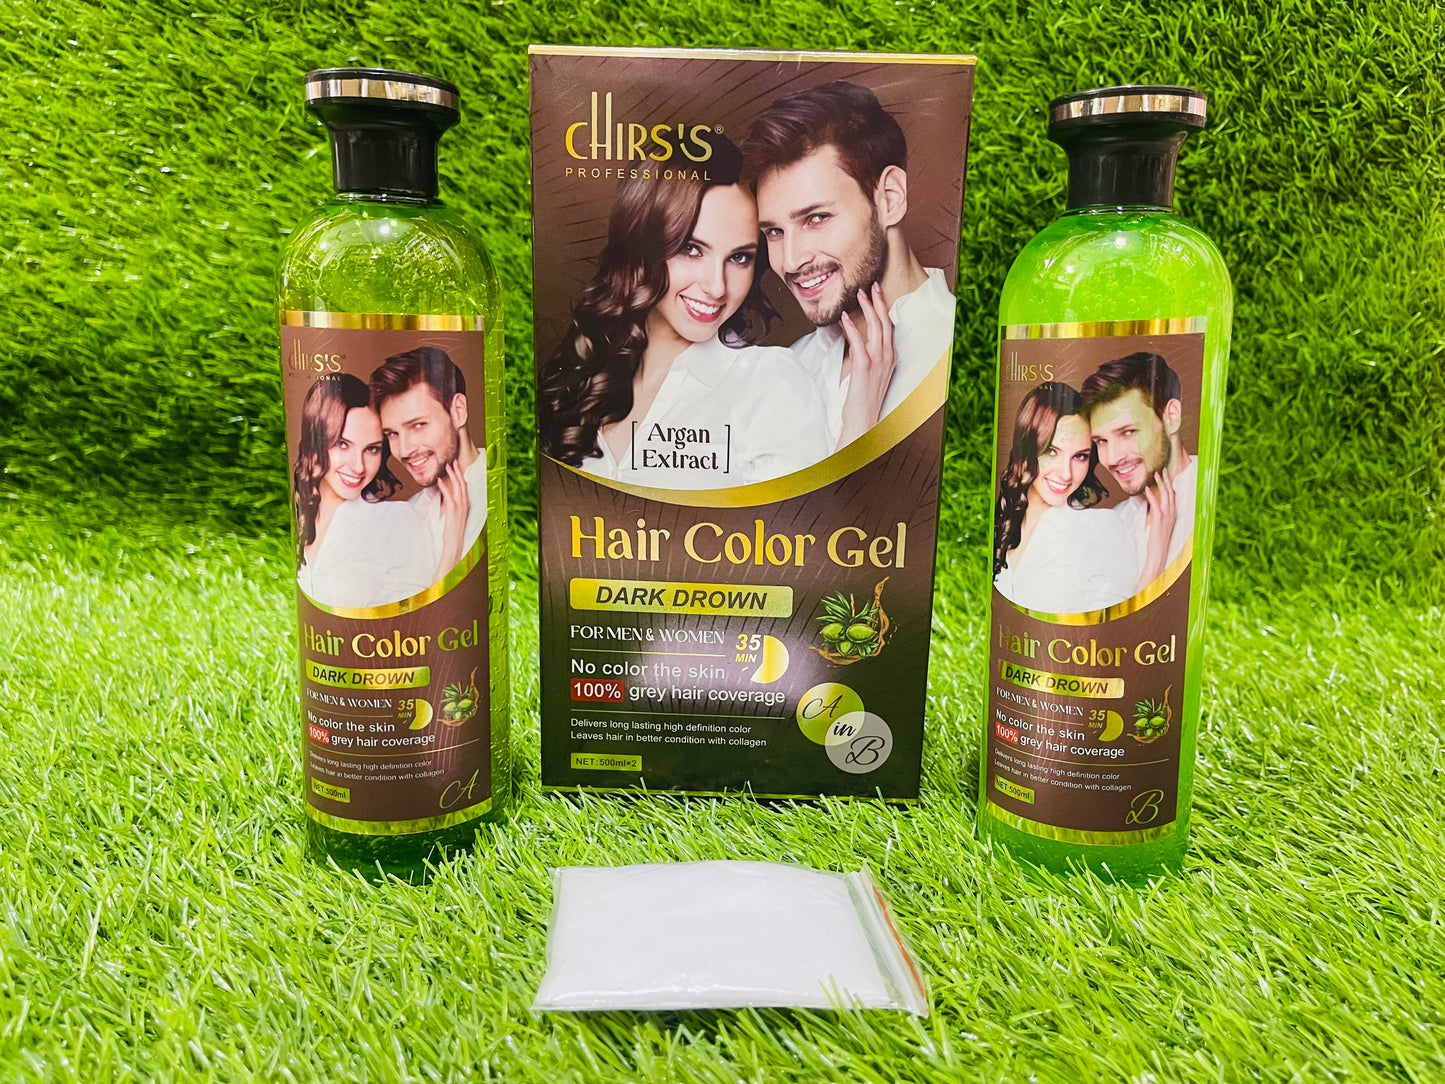 Chirs’s Professional Hair color gel 500*2ML